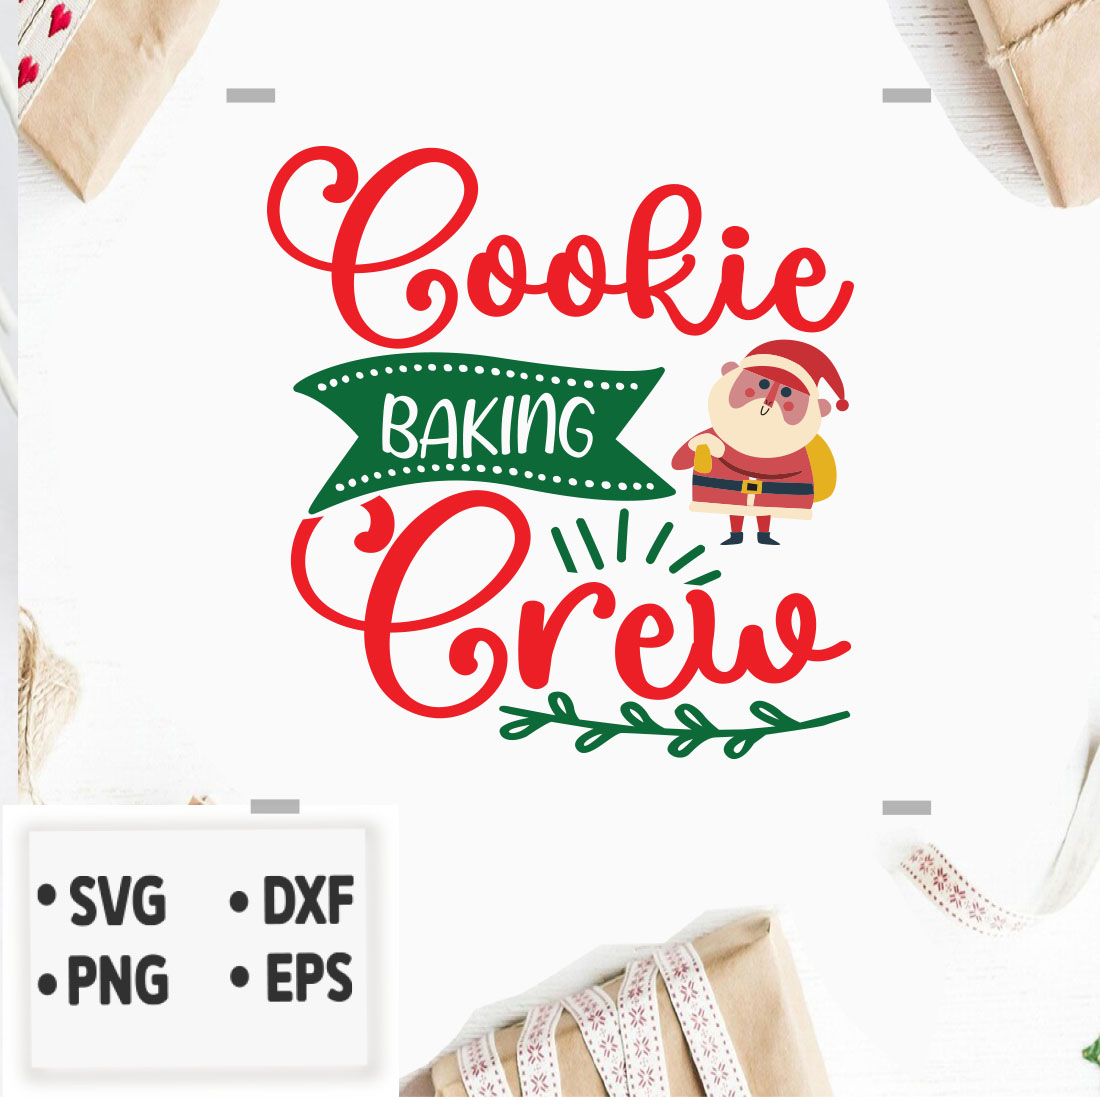 Image with enchanting inscription Cookie baking crew.